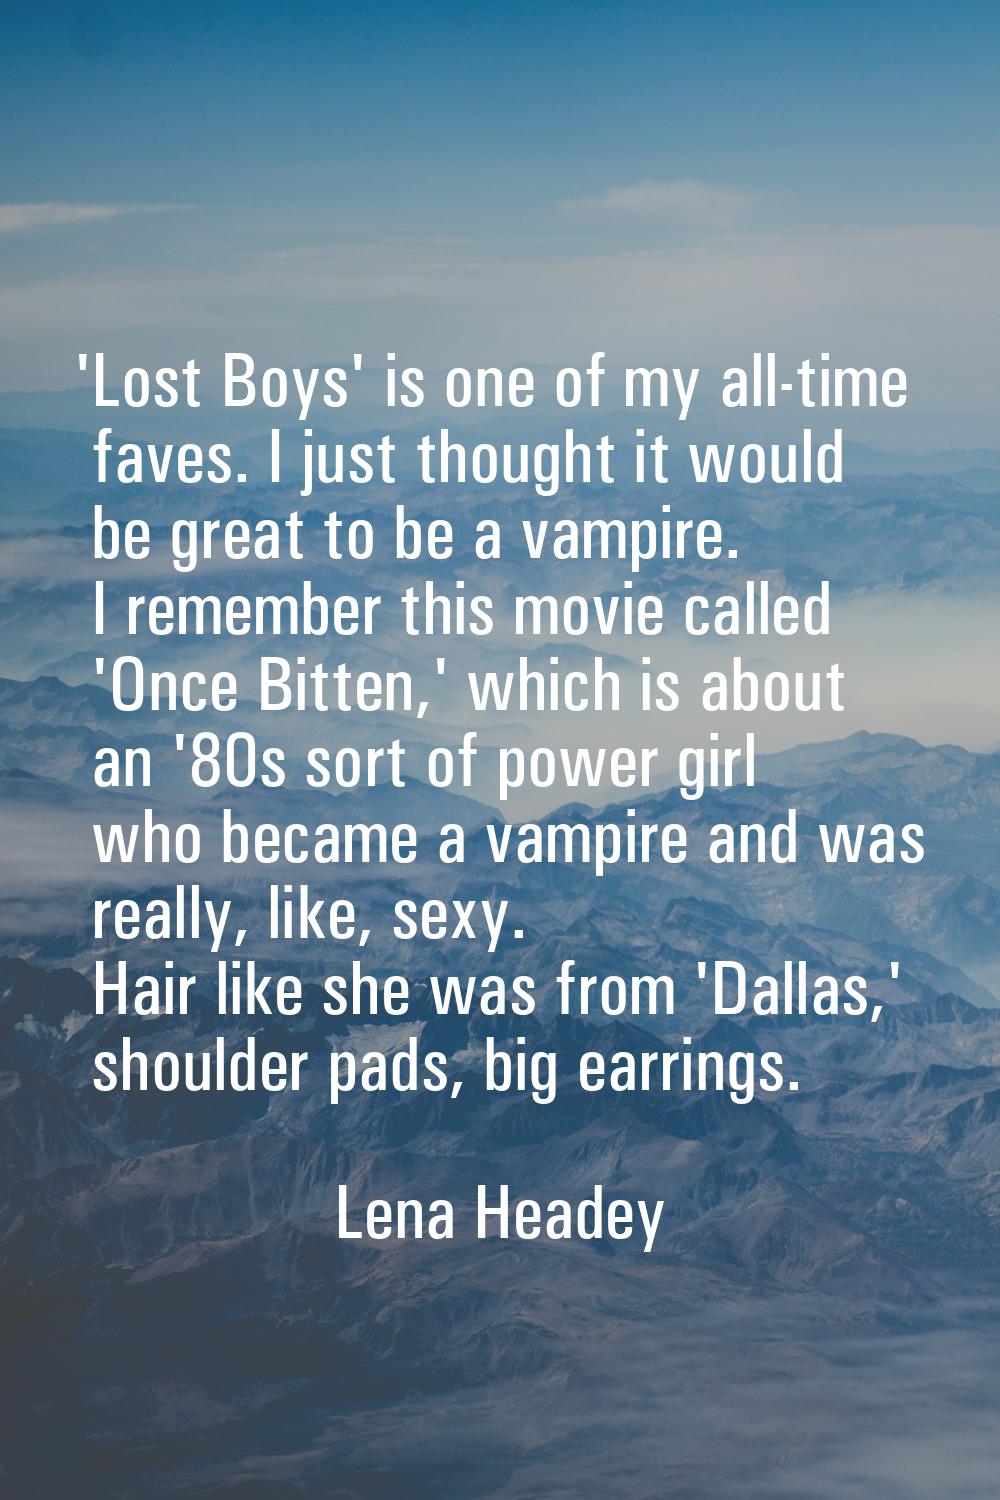 'Lost Boys' is one of my all-time faves. I just thought it would be great to be a vampire. I rememb